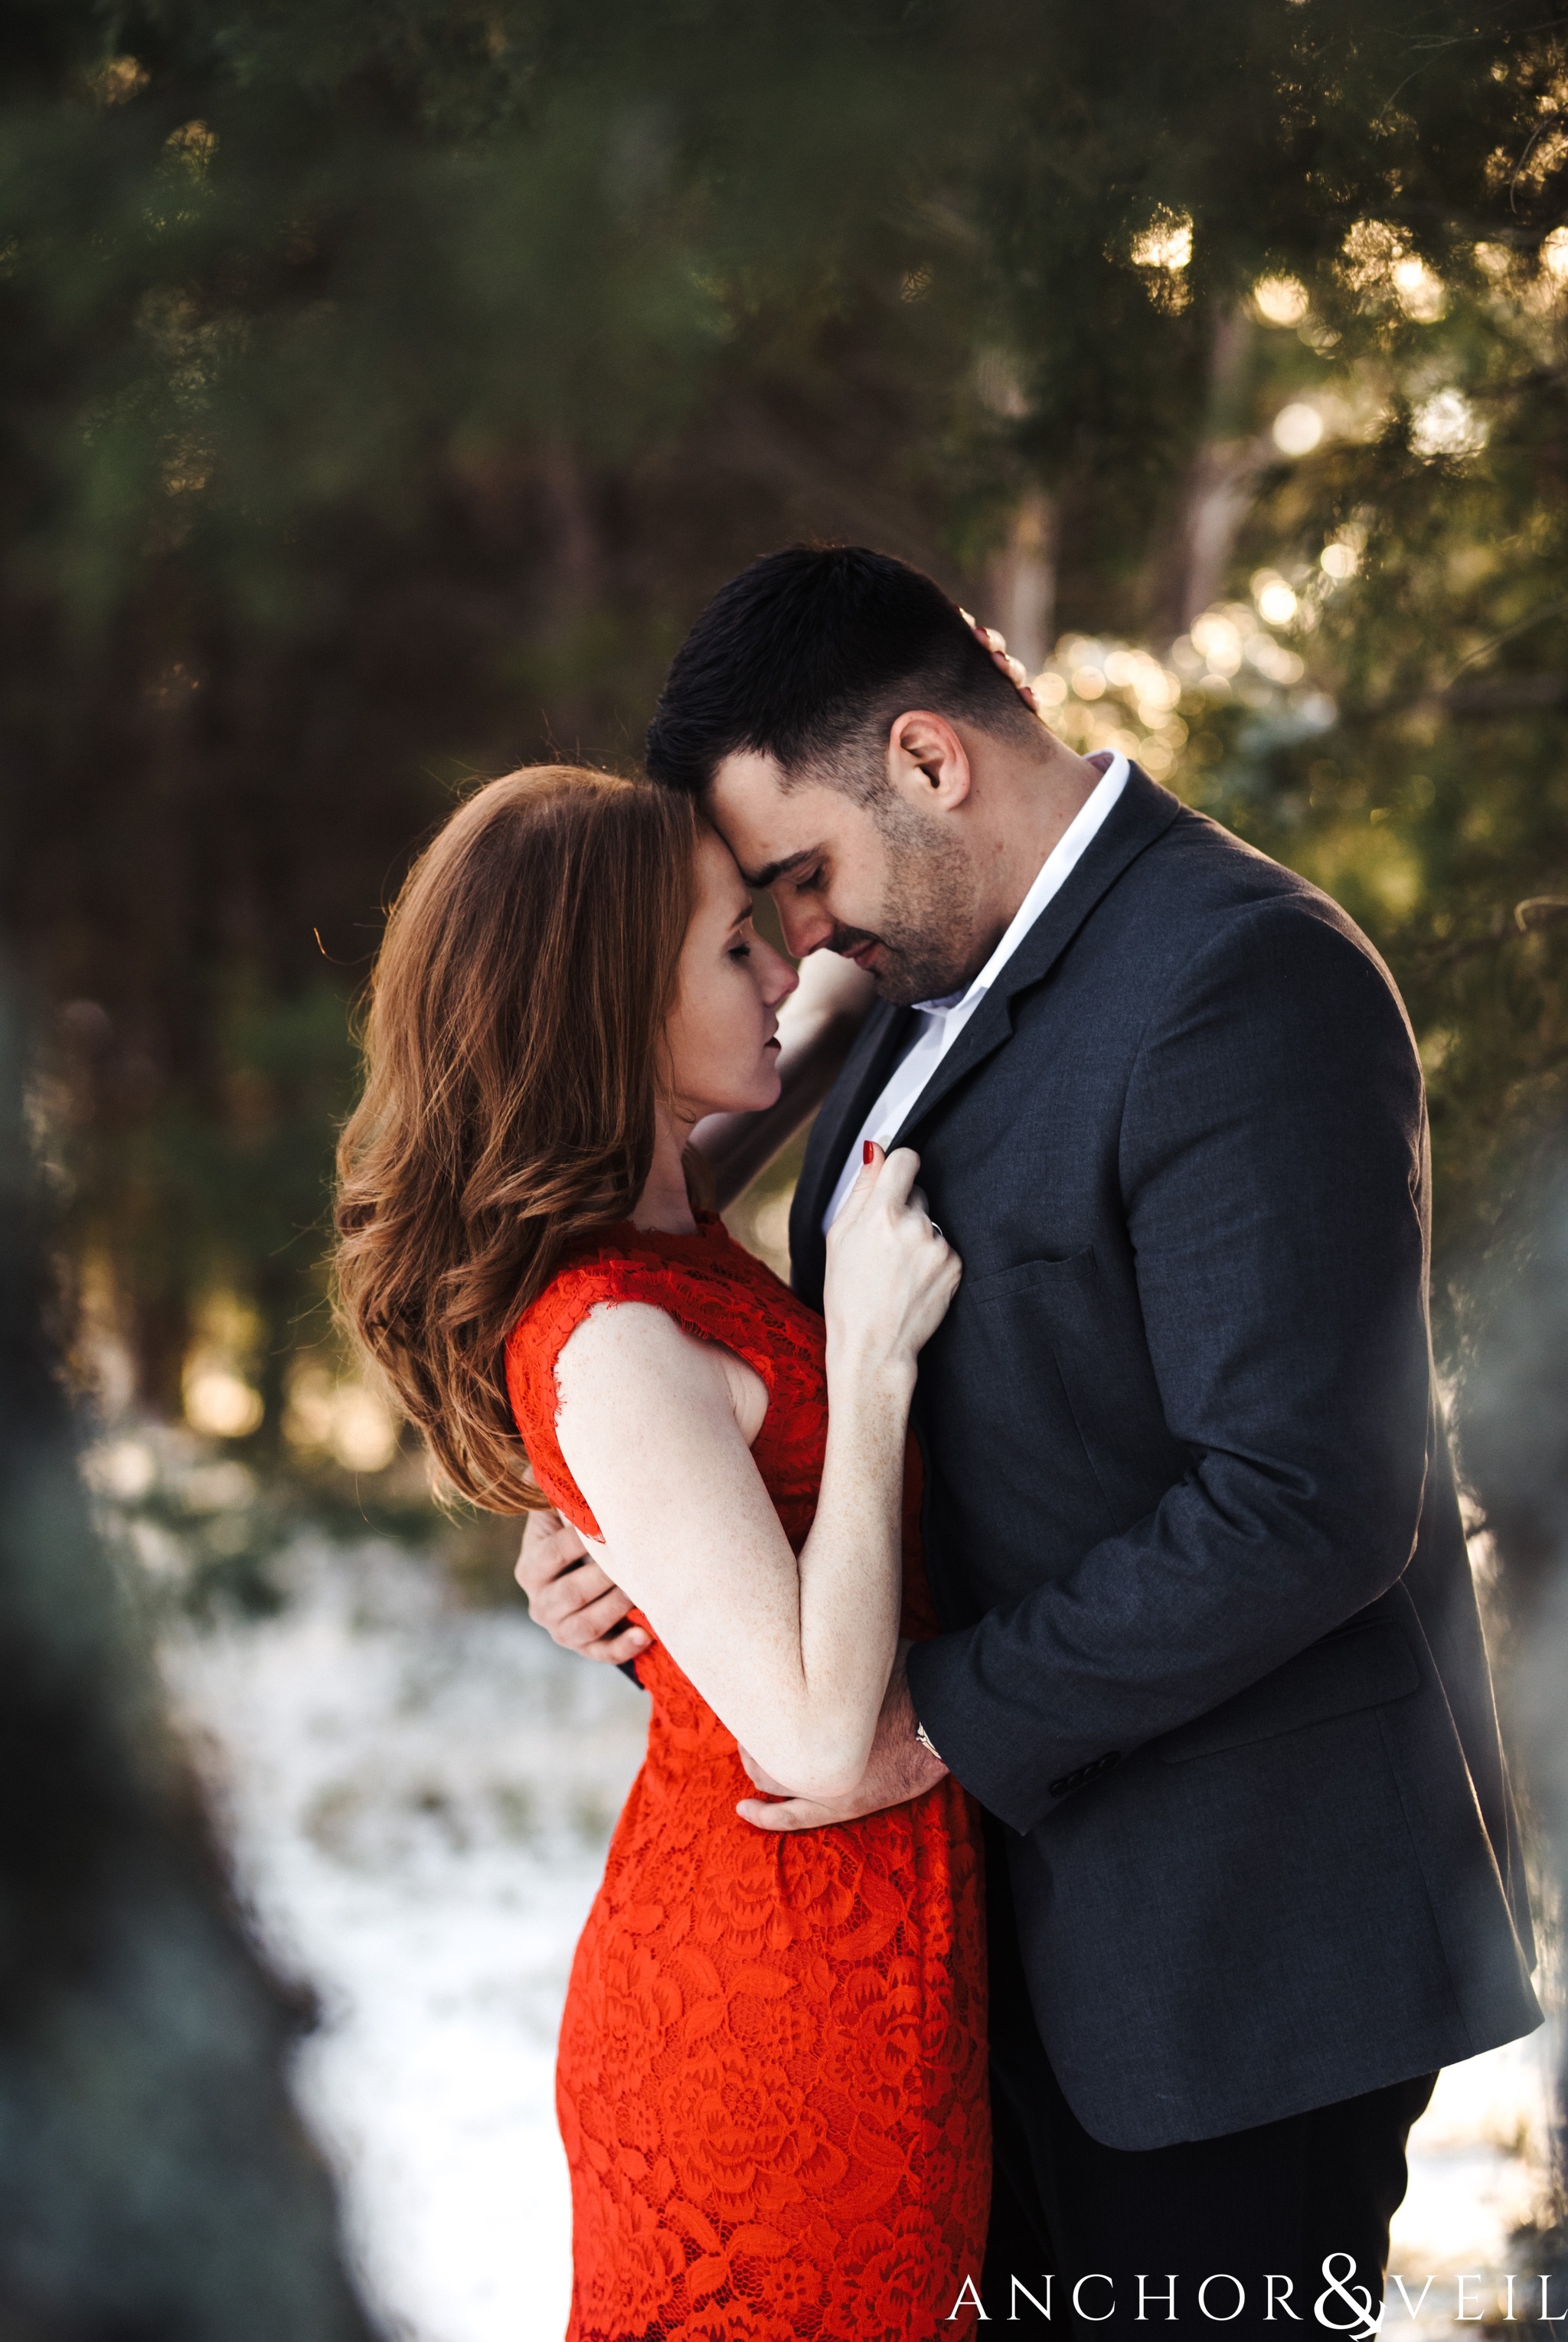 bringing him close by the lapel during their Charlotte Snow engagement session in the woods